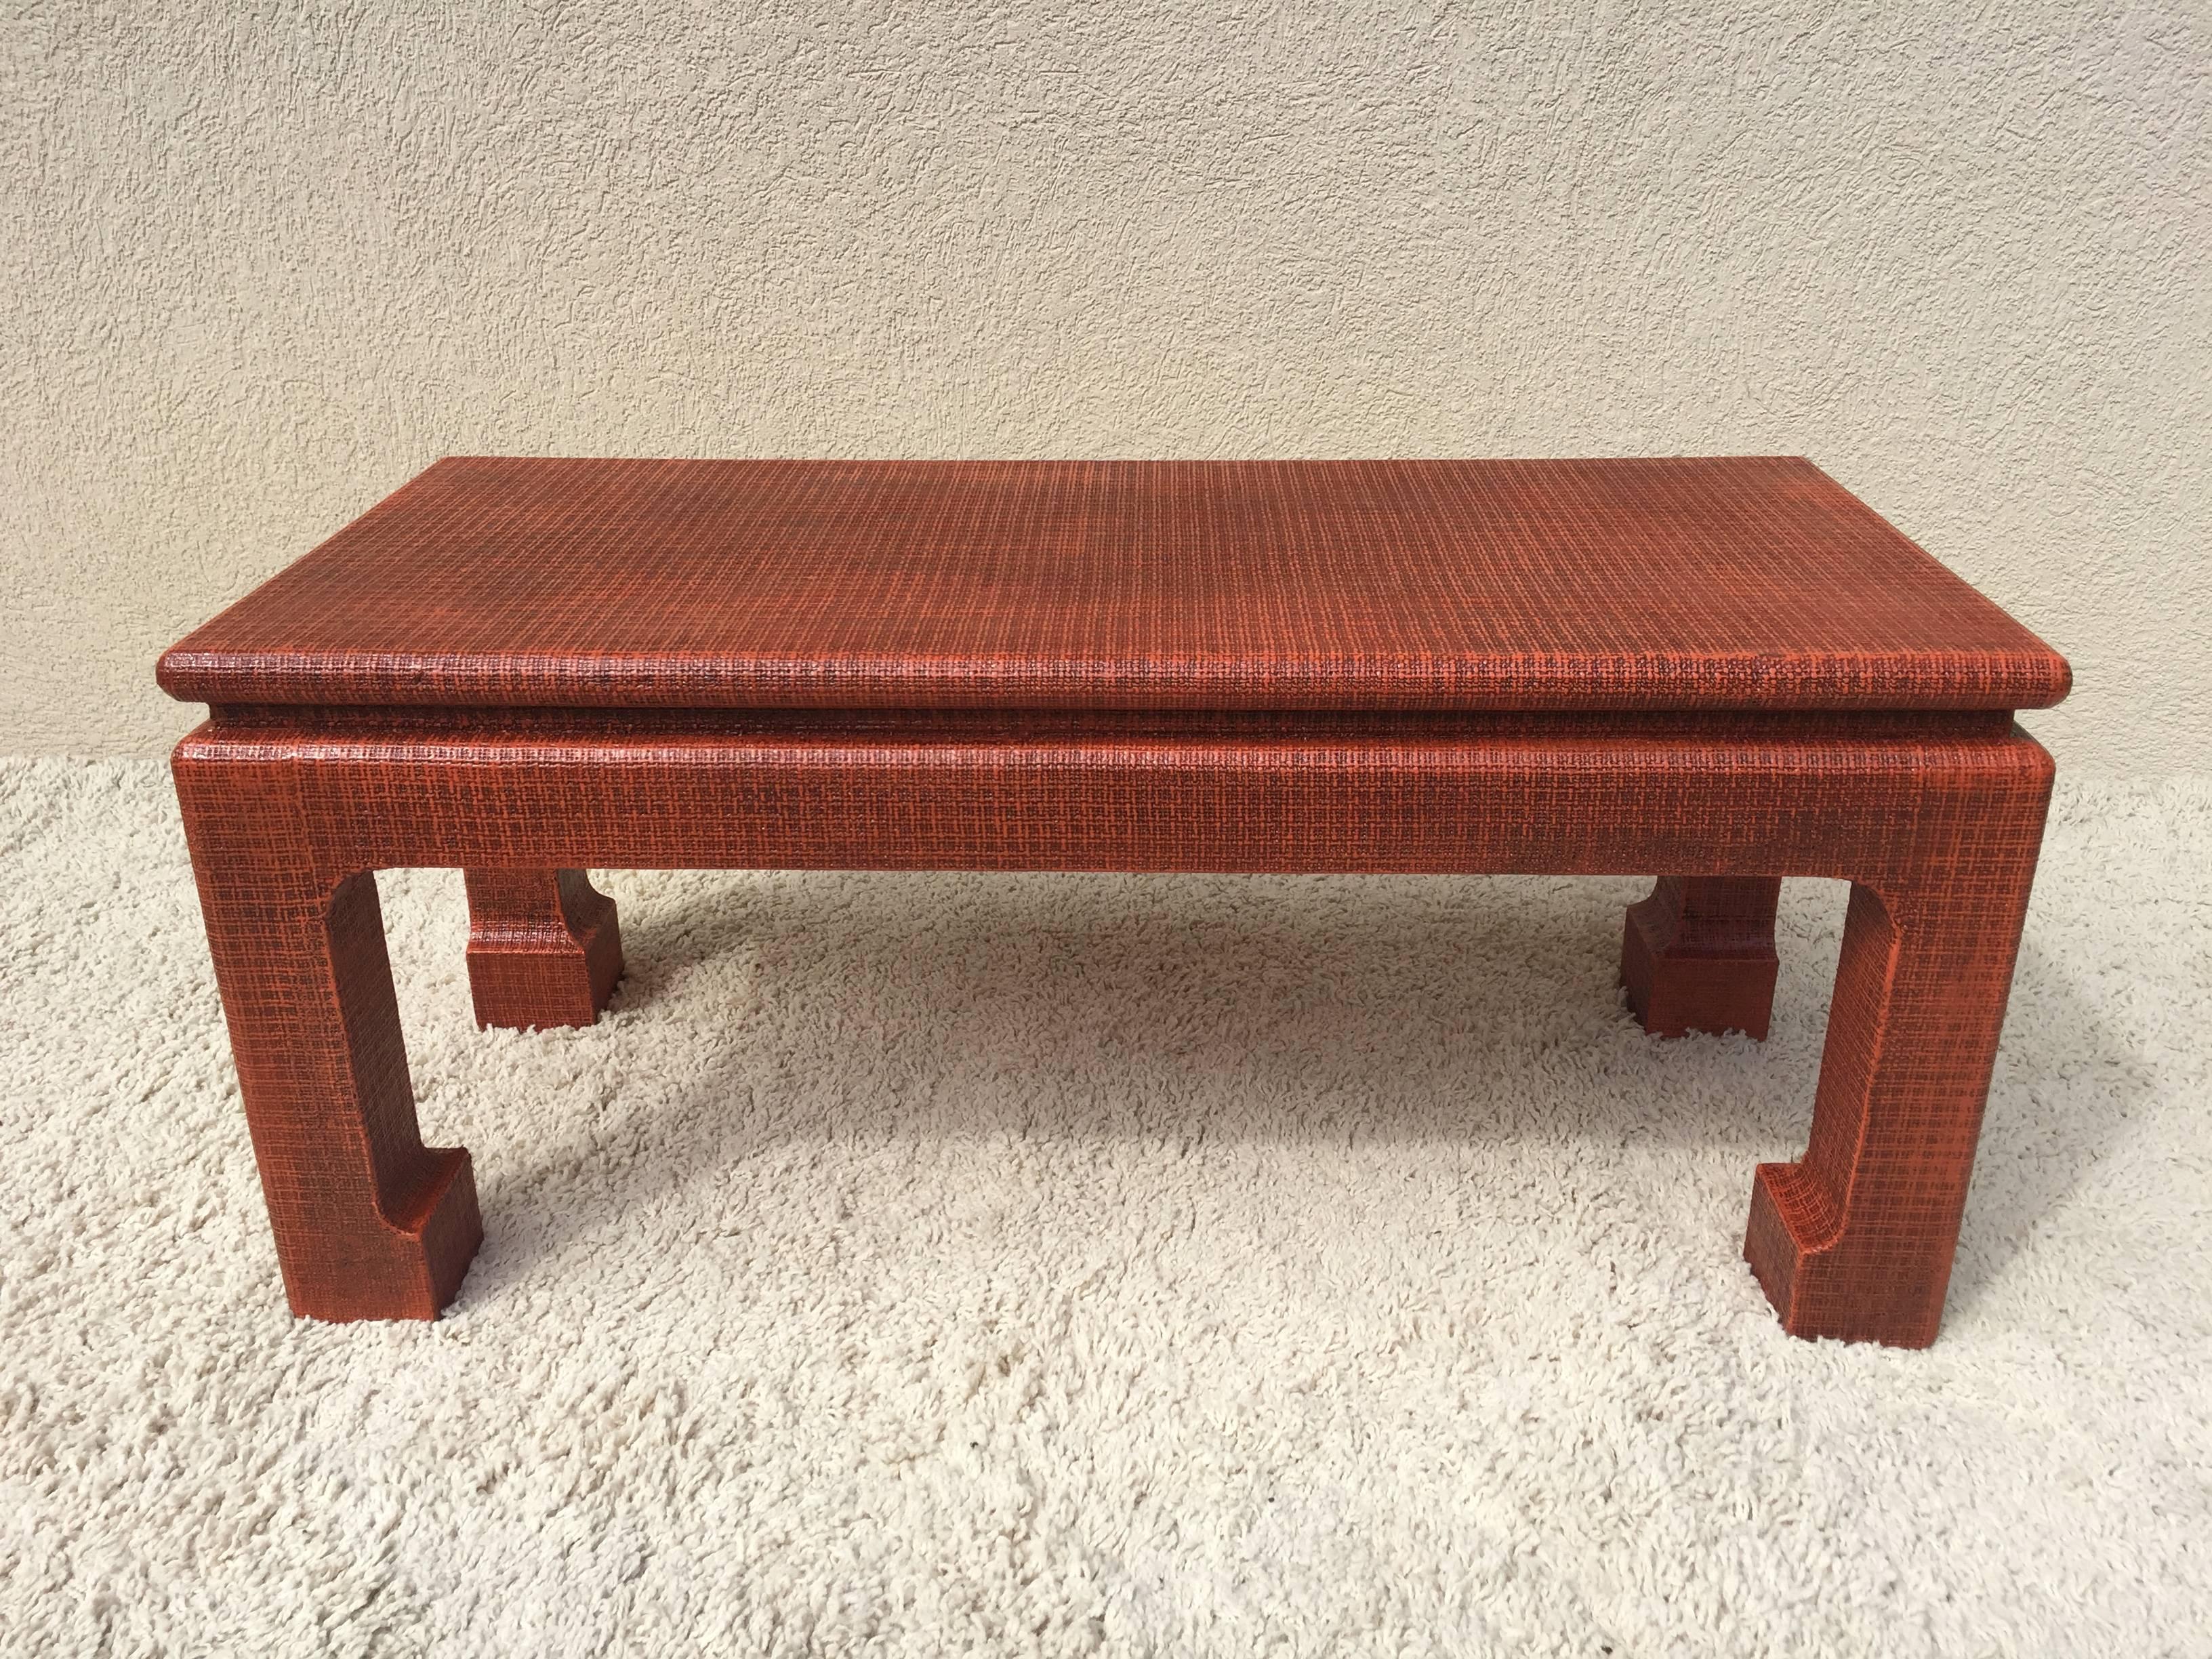 Karl Springer style orange lacquer grass cloth parsons petite table or bench, in very fine condition, no marking but from a home decorated by Karl Springer in Bridgehampton LI.